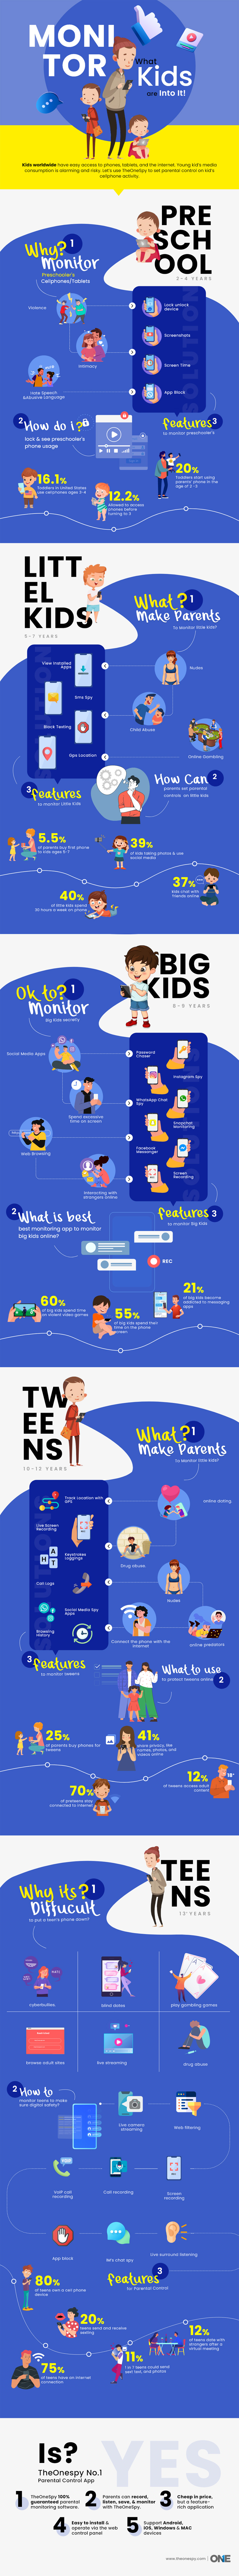 Monitor What Kids Are Into It! #infographic #Pregnancy & Parenting, Social Media